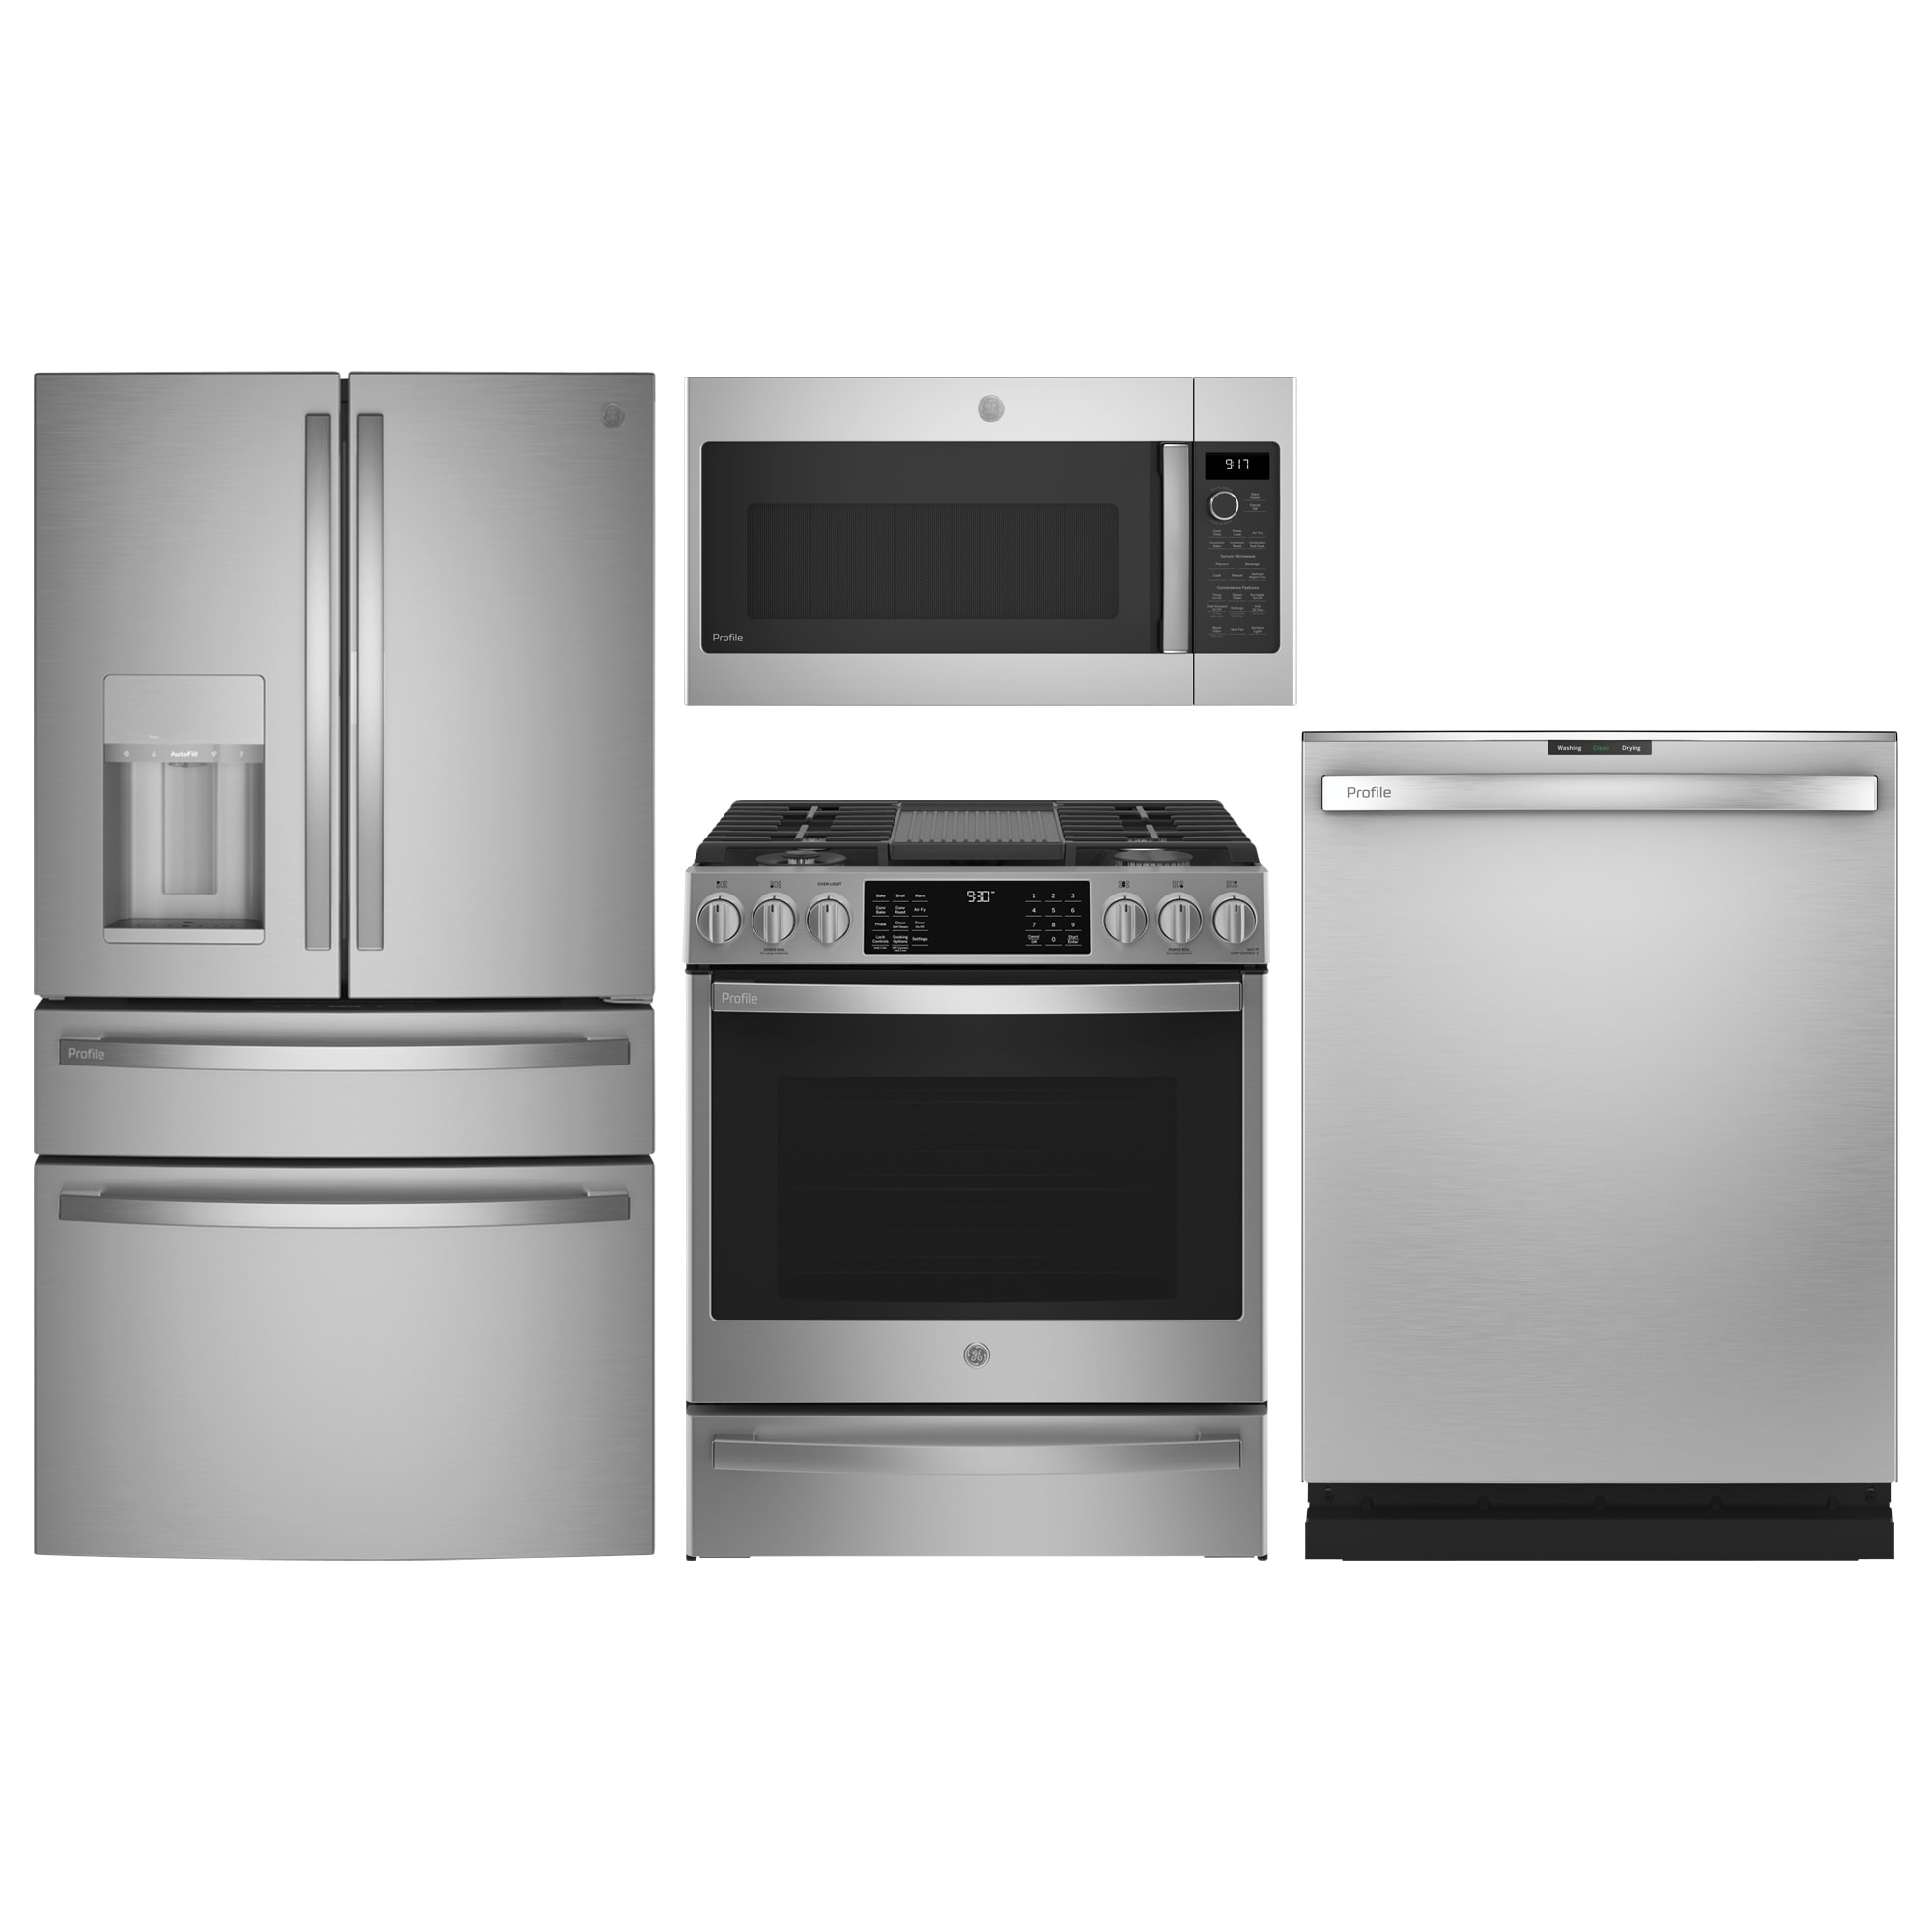 GE Profile 3 Piece Kitchen Appliance Package with PVD28BYNFS 36 Inch Smart  Freestanding 4 Door French Door Refrigerator, PB935YPFS 30 Inch Smart  Freestanding Electric Range and PDT715SYNFS 24 Inch Built-In Bar Handle